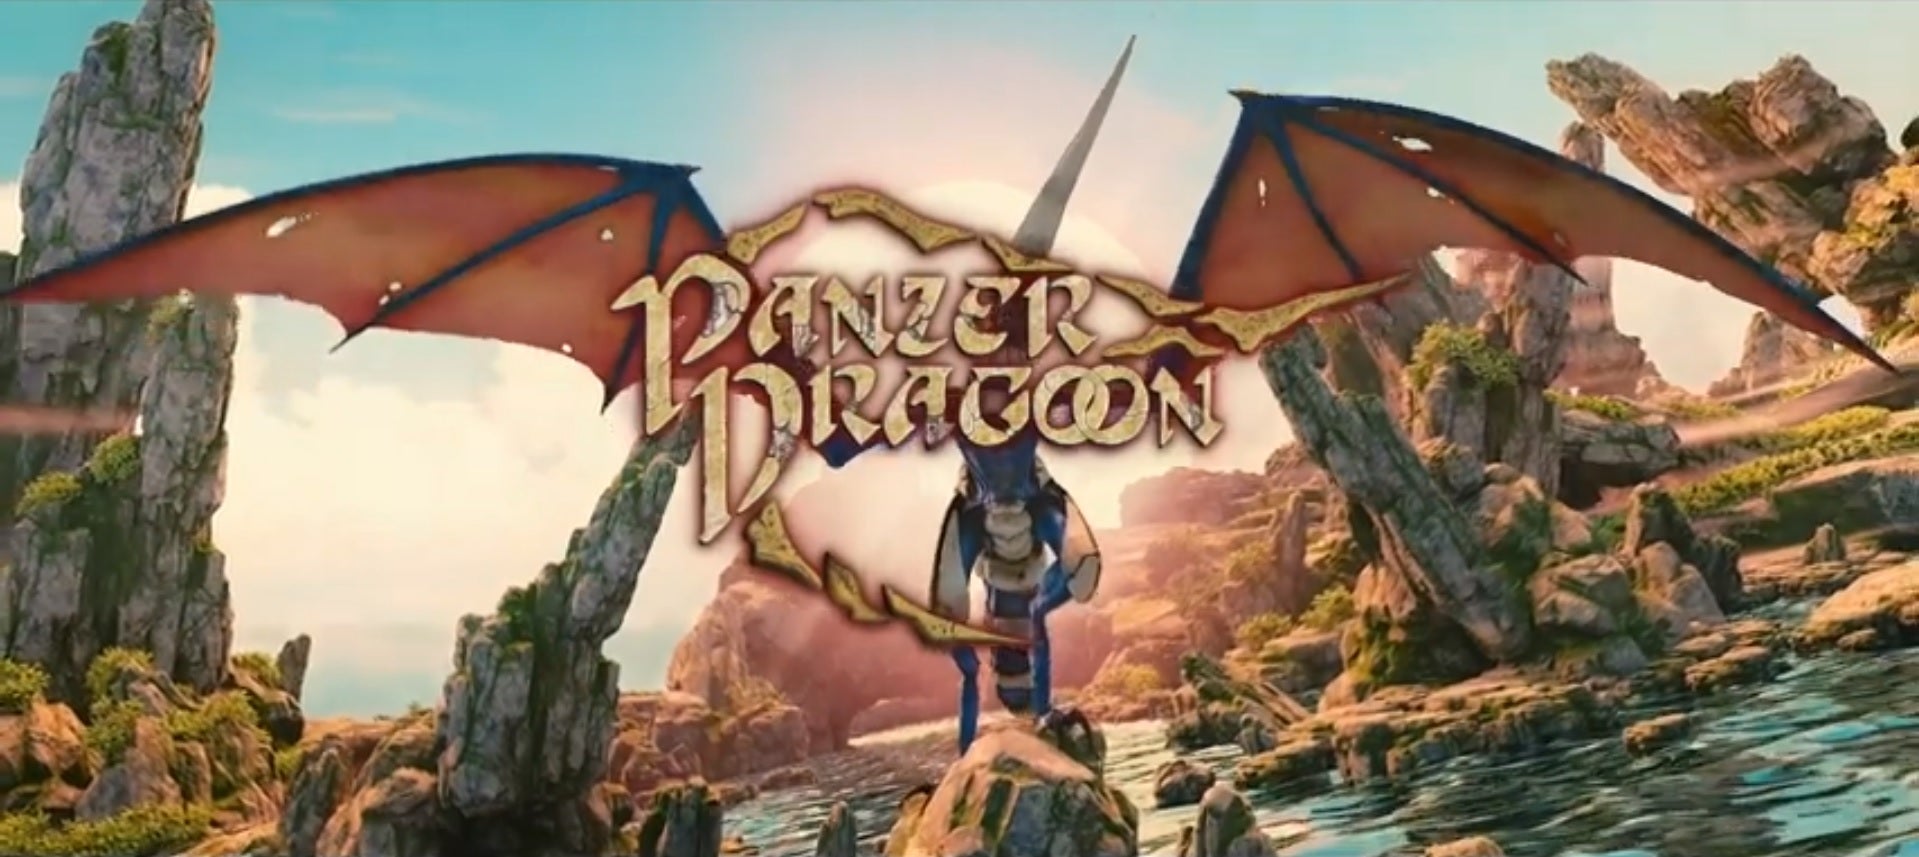 Image for Panzer Dragoon comes to Nintendo Switch this Winter